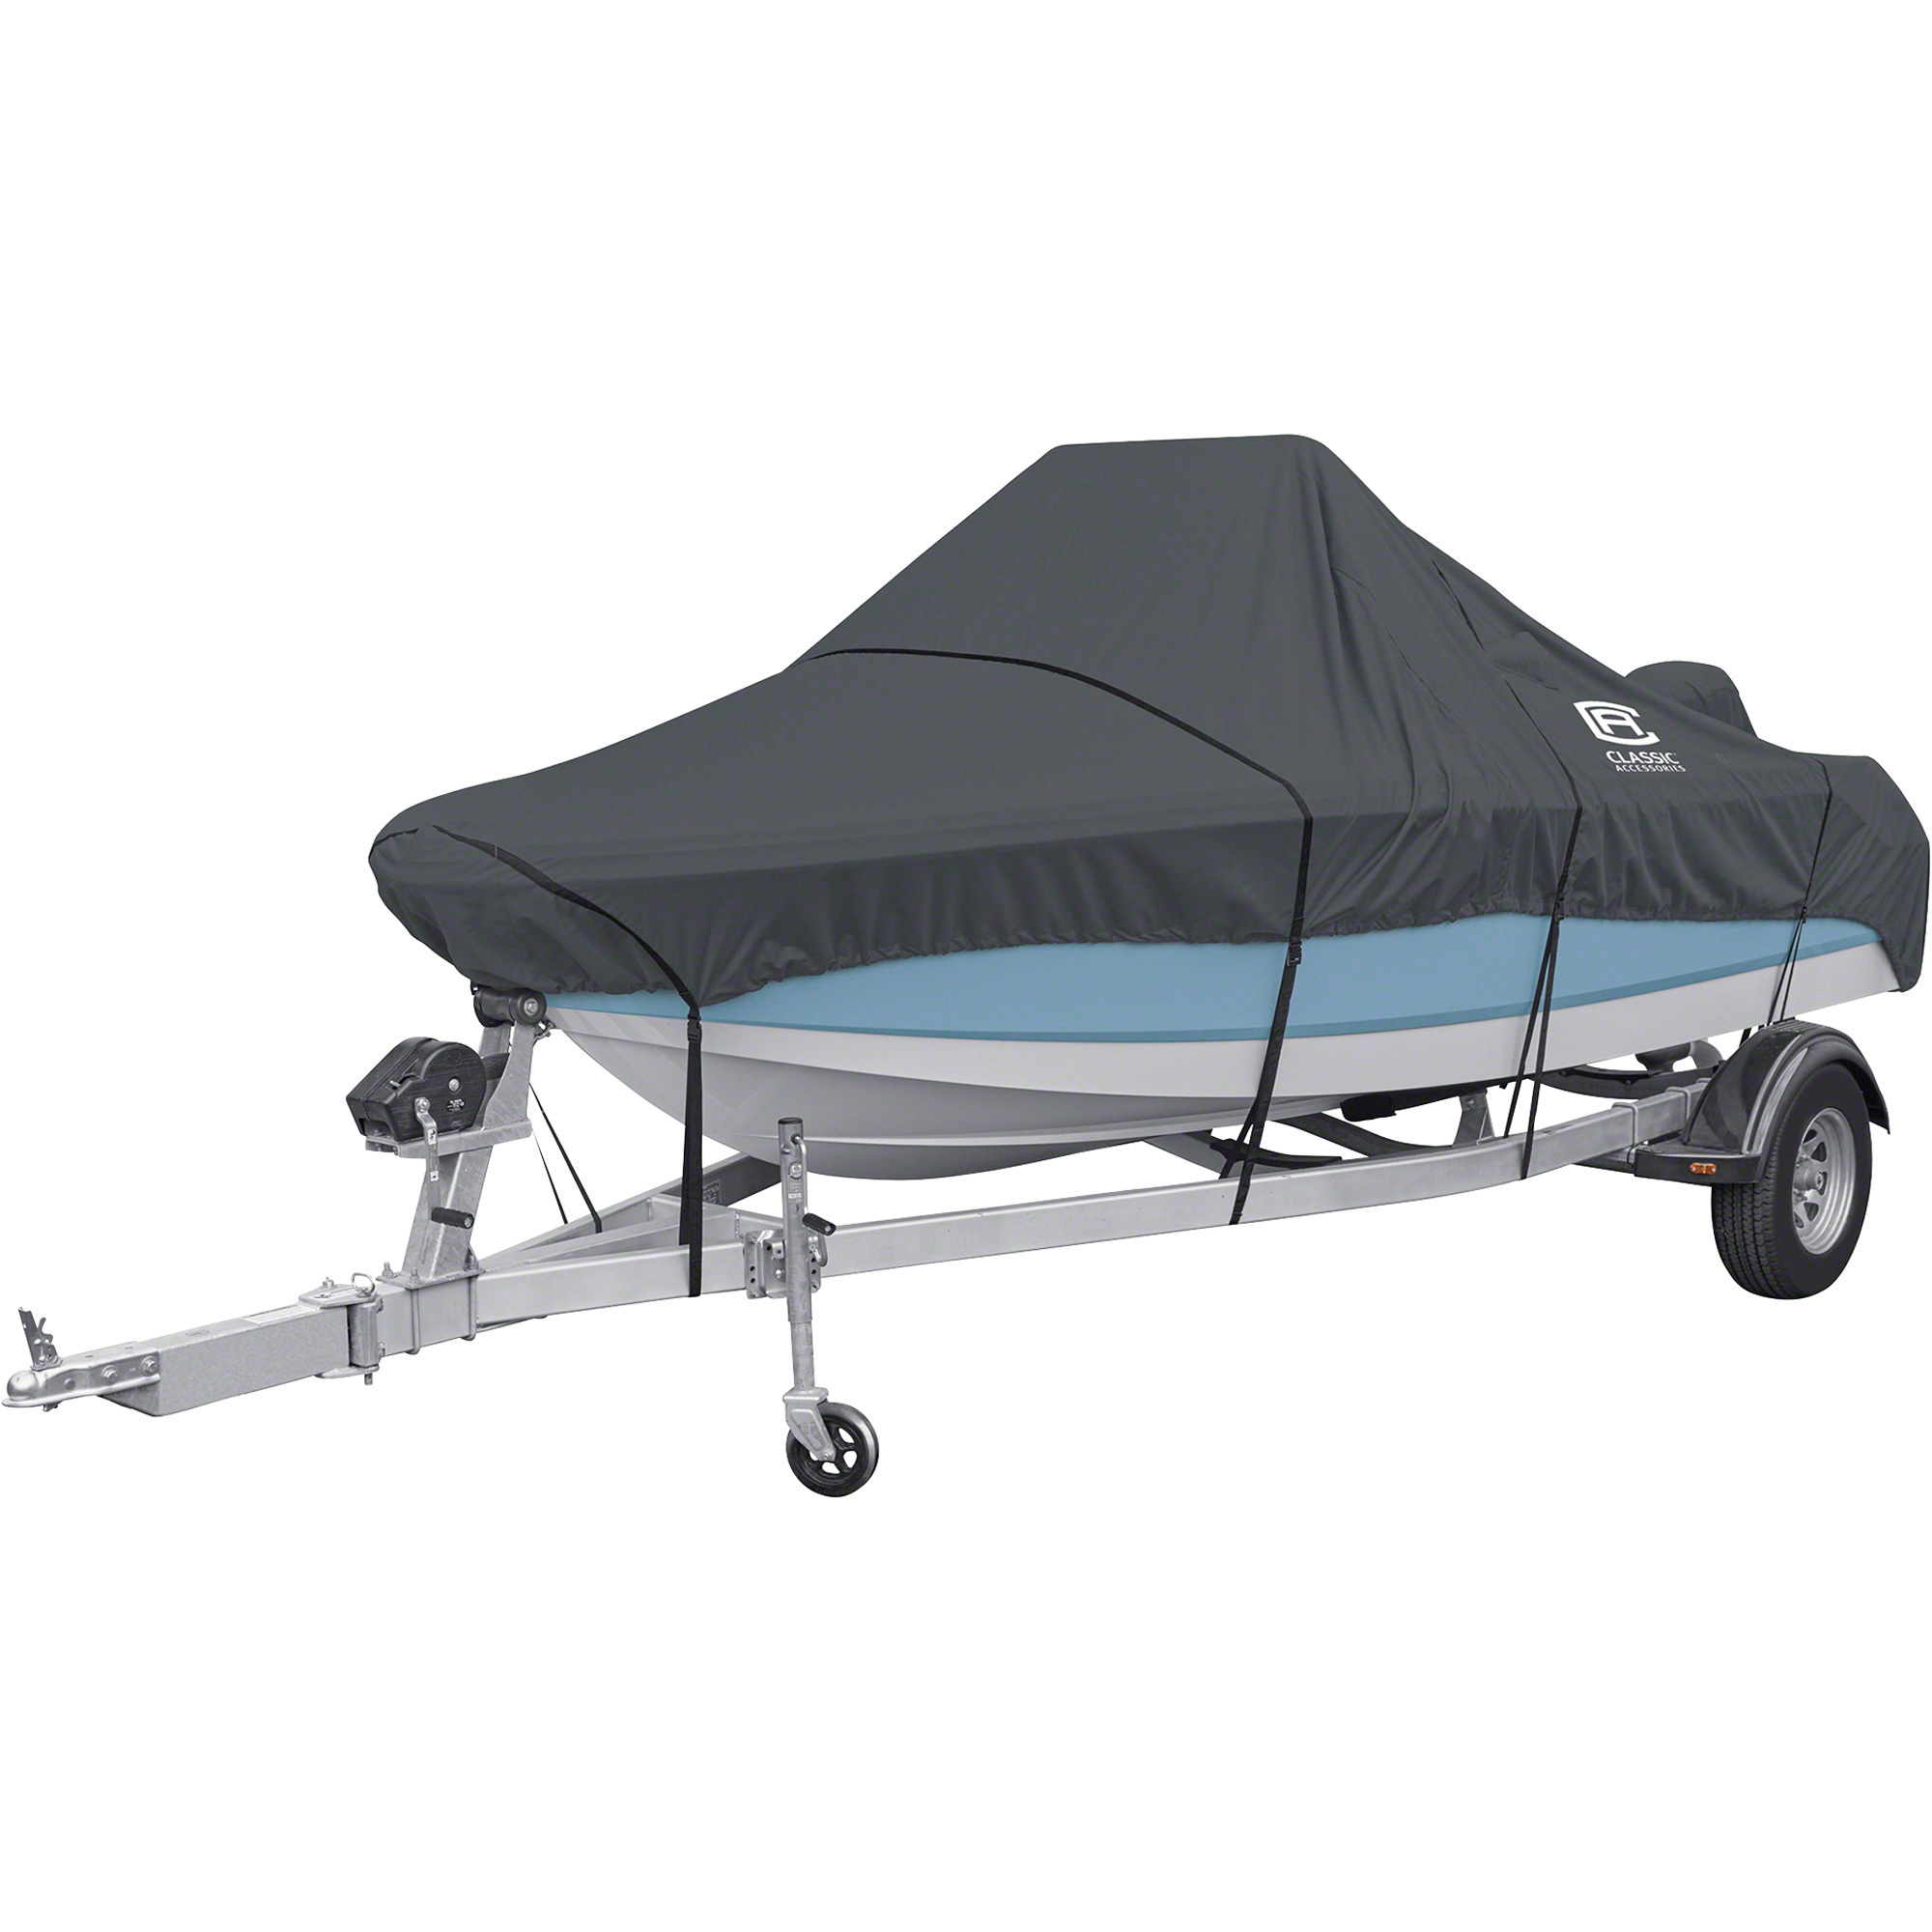 Classic Accessories StormPro Heavy-Duty Boat Cover, Charcoal, Fits 20ft.-22ft. x 106Inch W Center Console Boats, Model 20-304-121001-RT